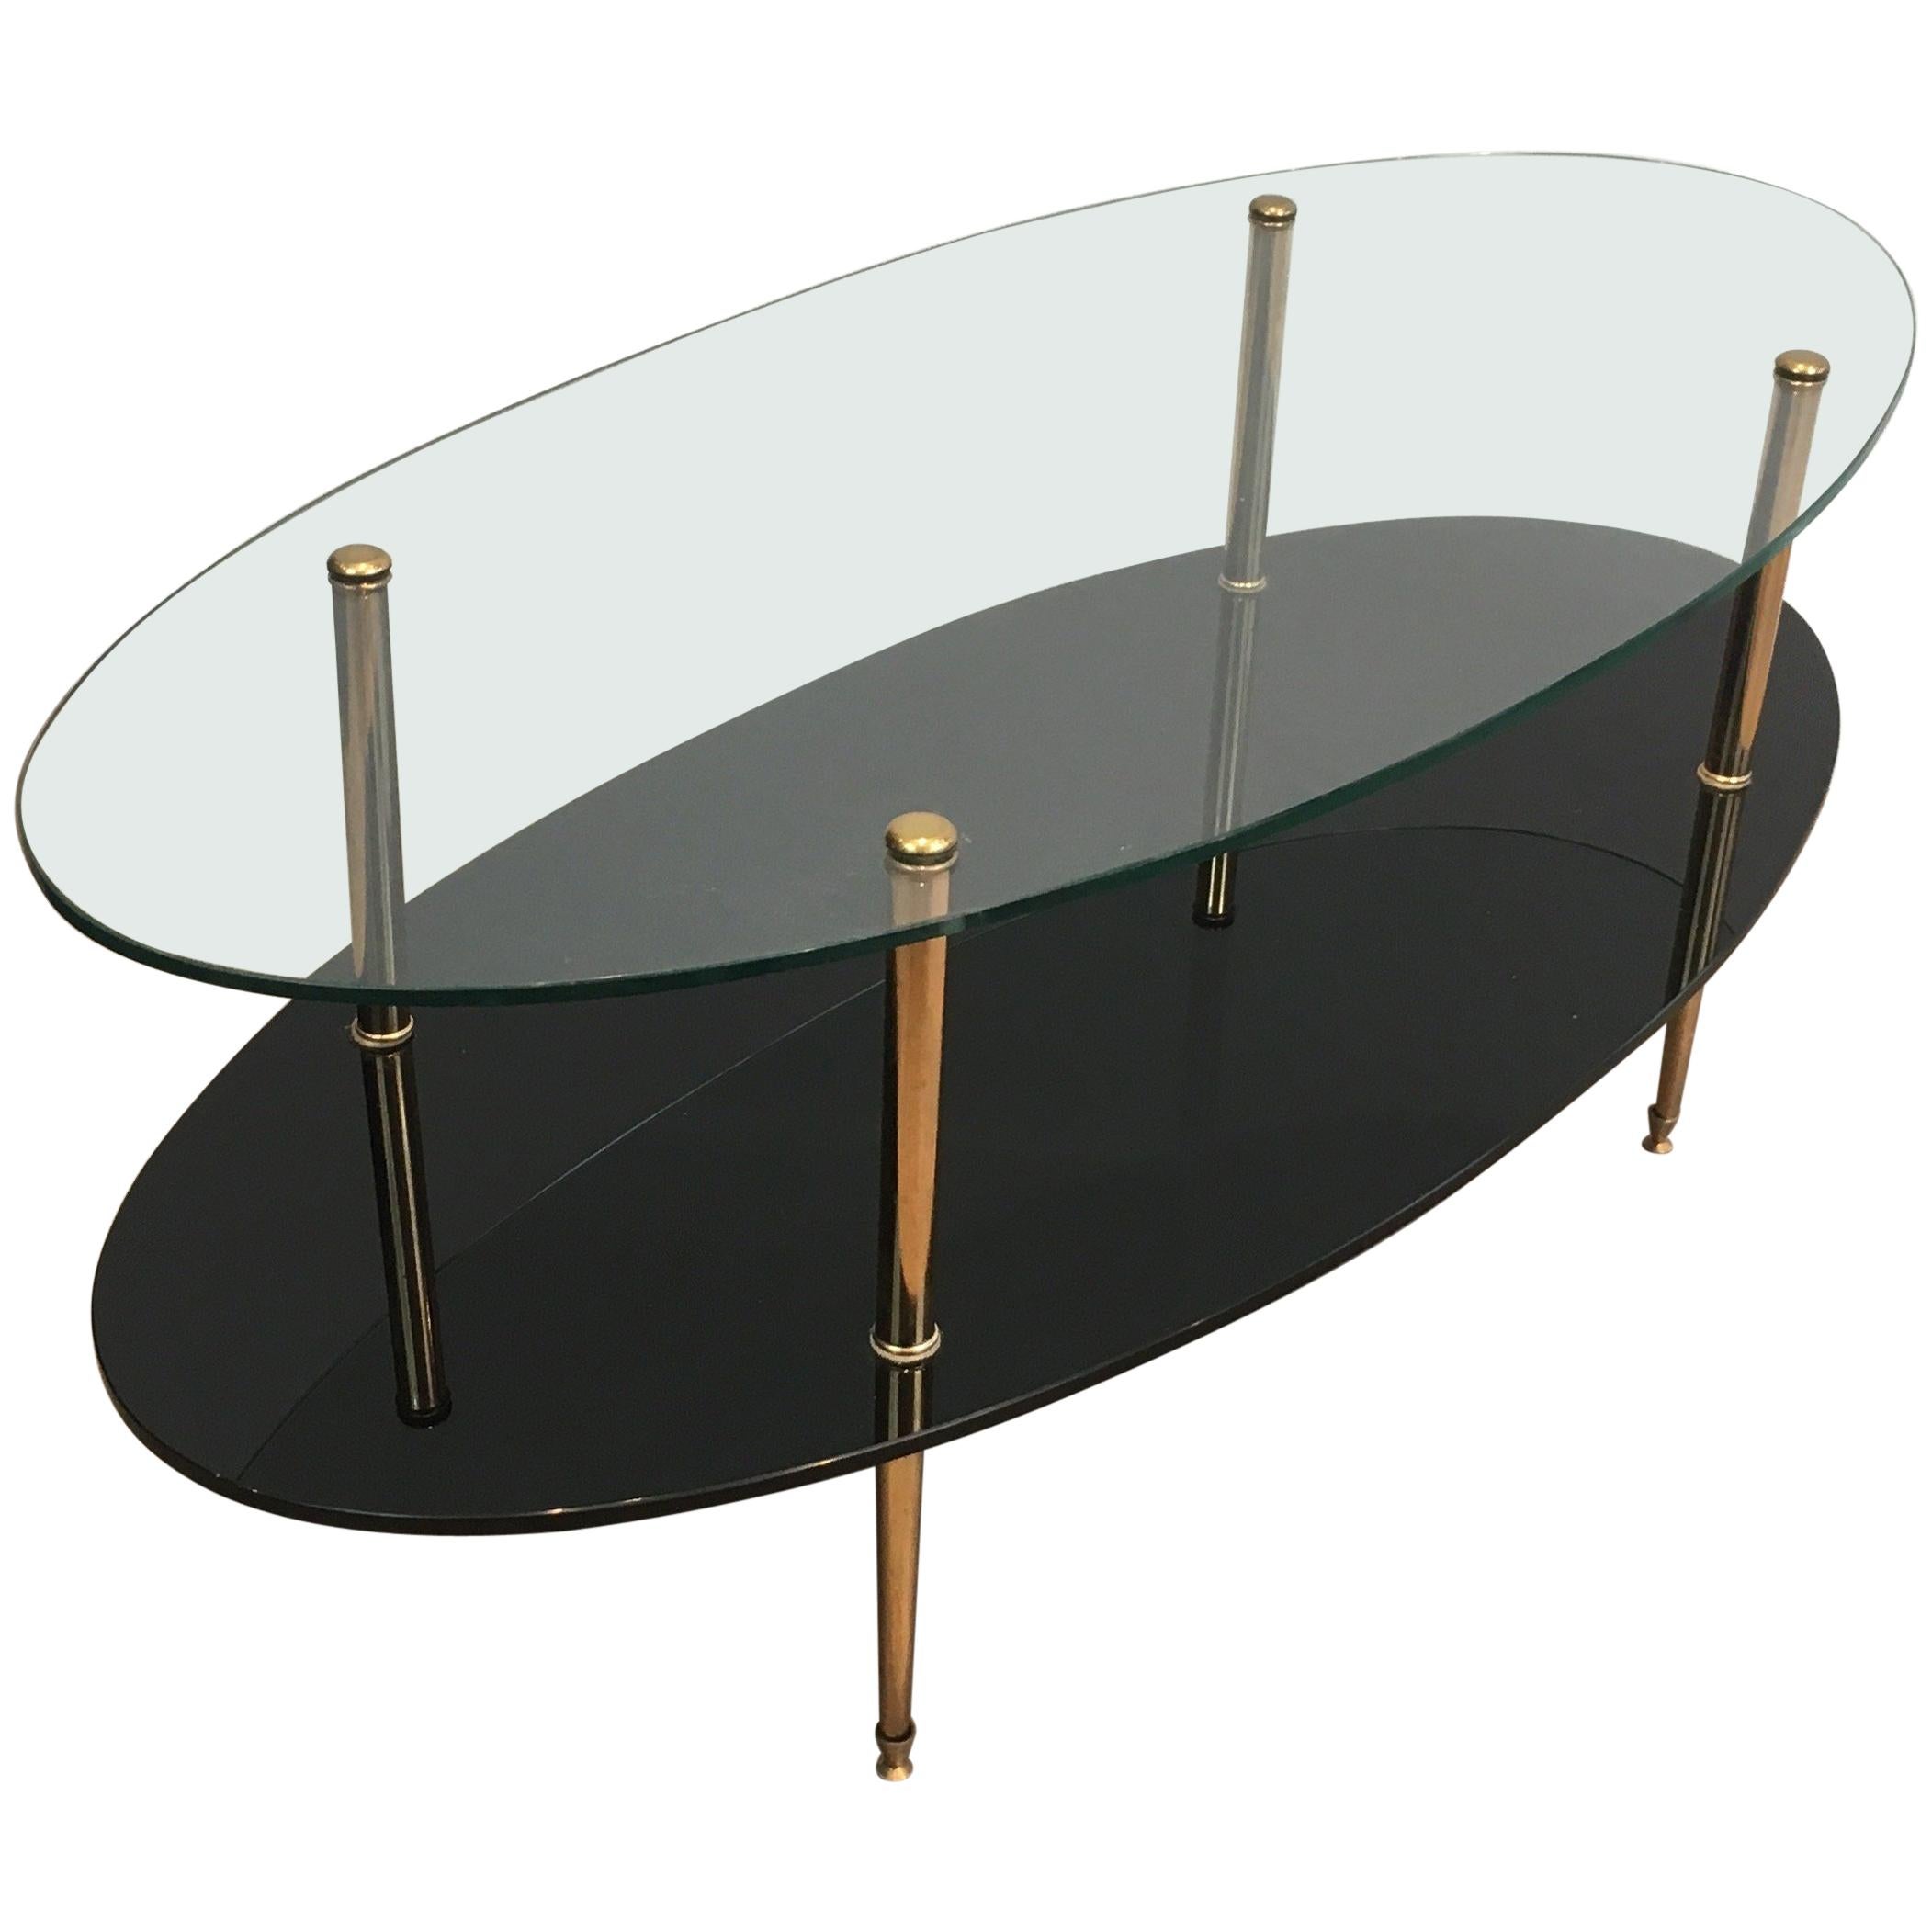 Design Coffee Table Made of Brass, Glass and Black Lacquer Glass